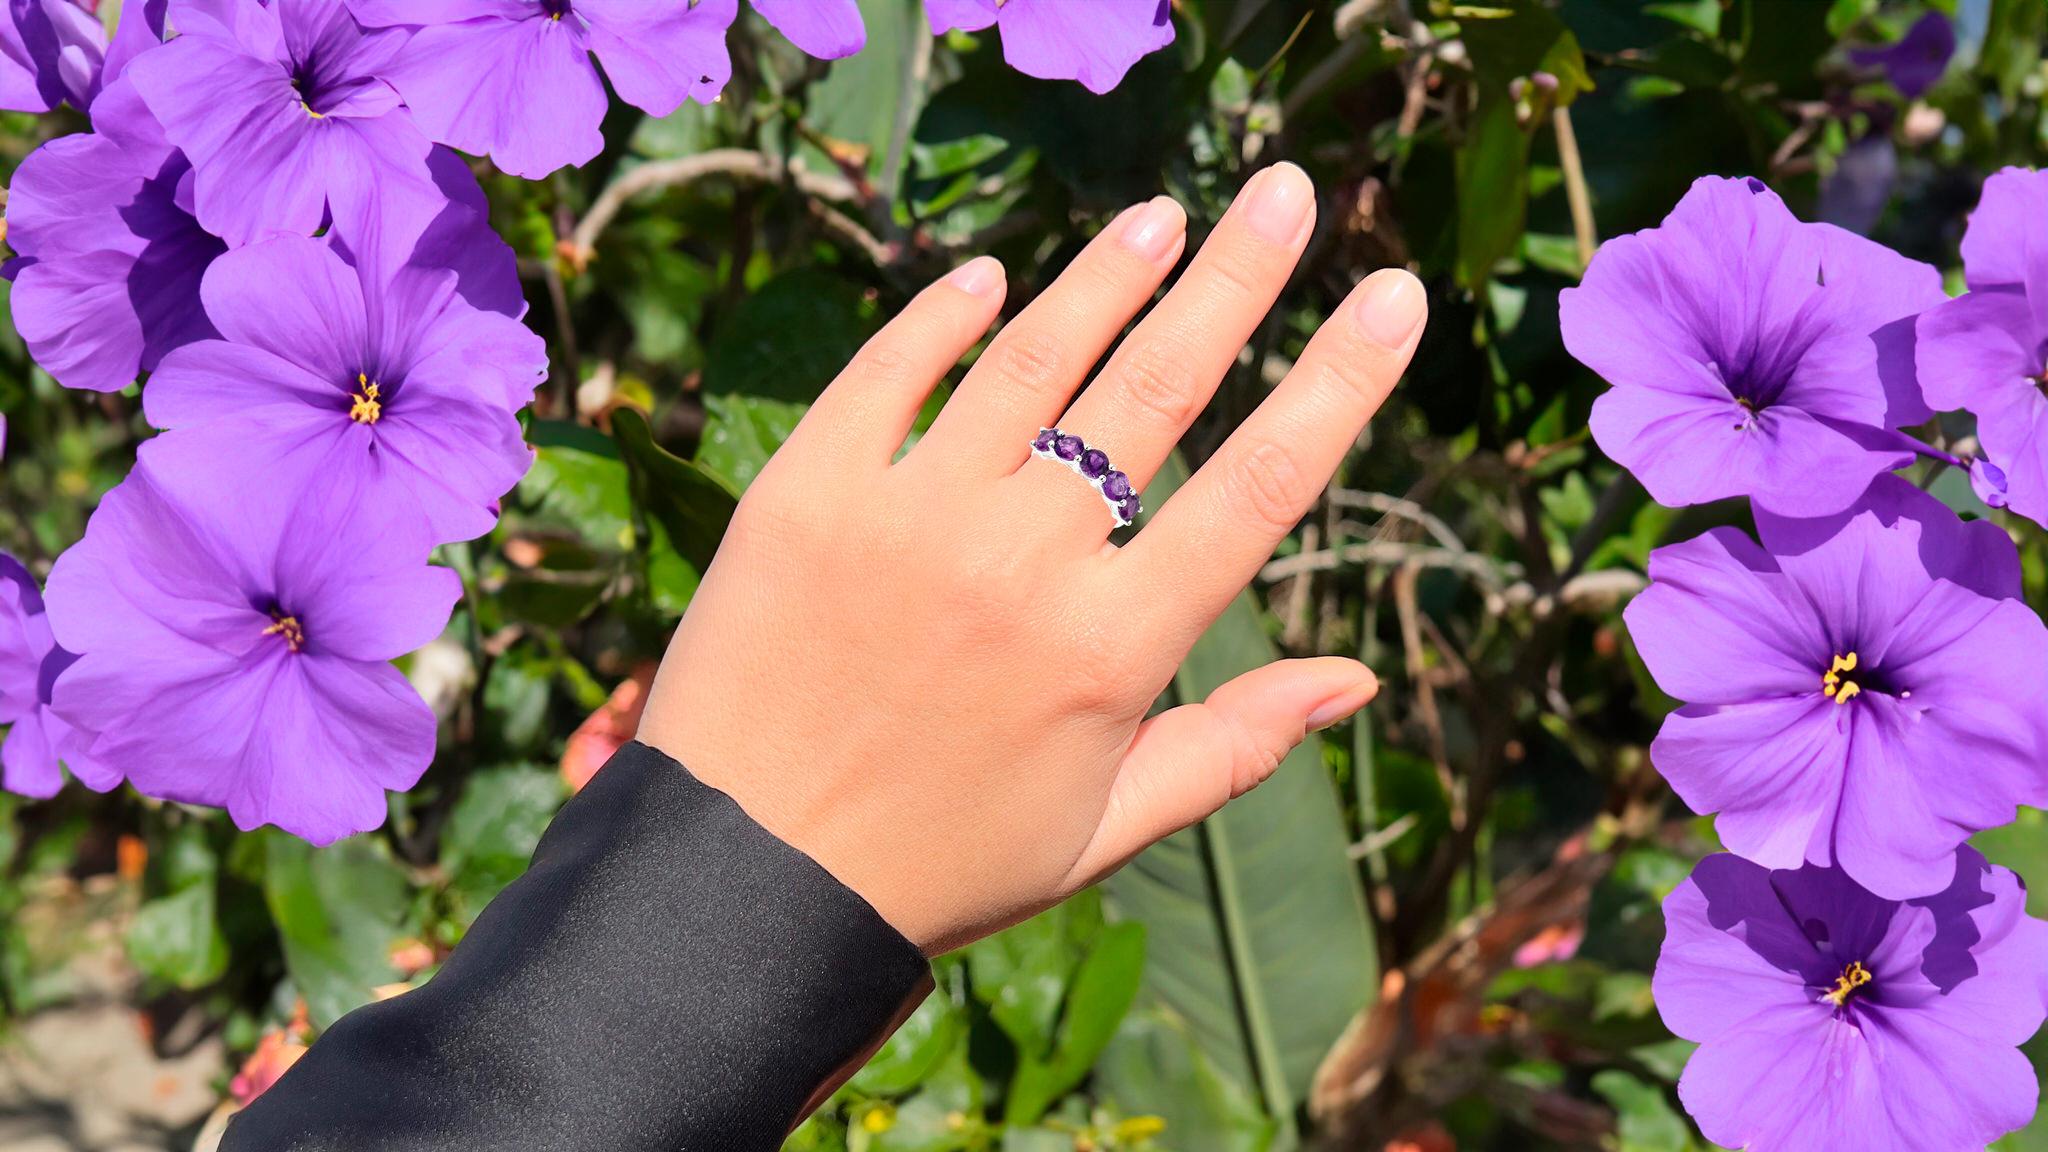 It comes with the Gemological Appraisal by GIA GG/AJP
5 Amethysts= 2.85 Carats
Metal: Rhodium Plated Sterling Silver
Ring Size: 9* US
*It can be resized complimentary